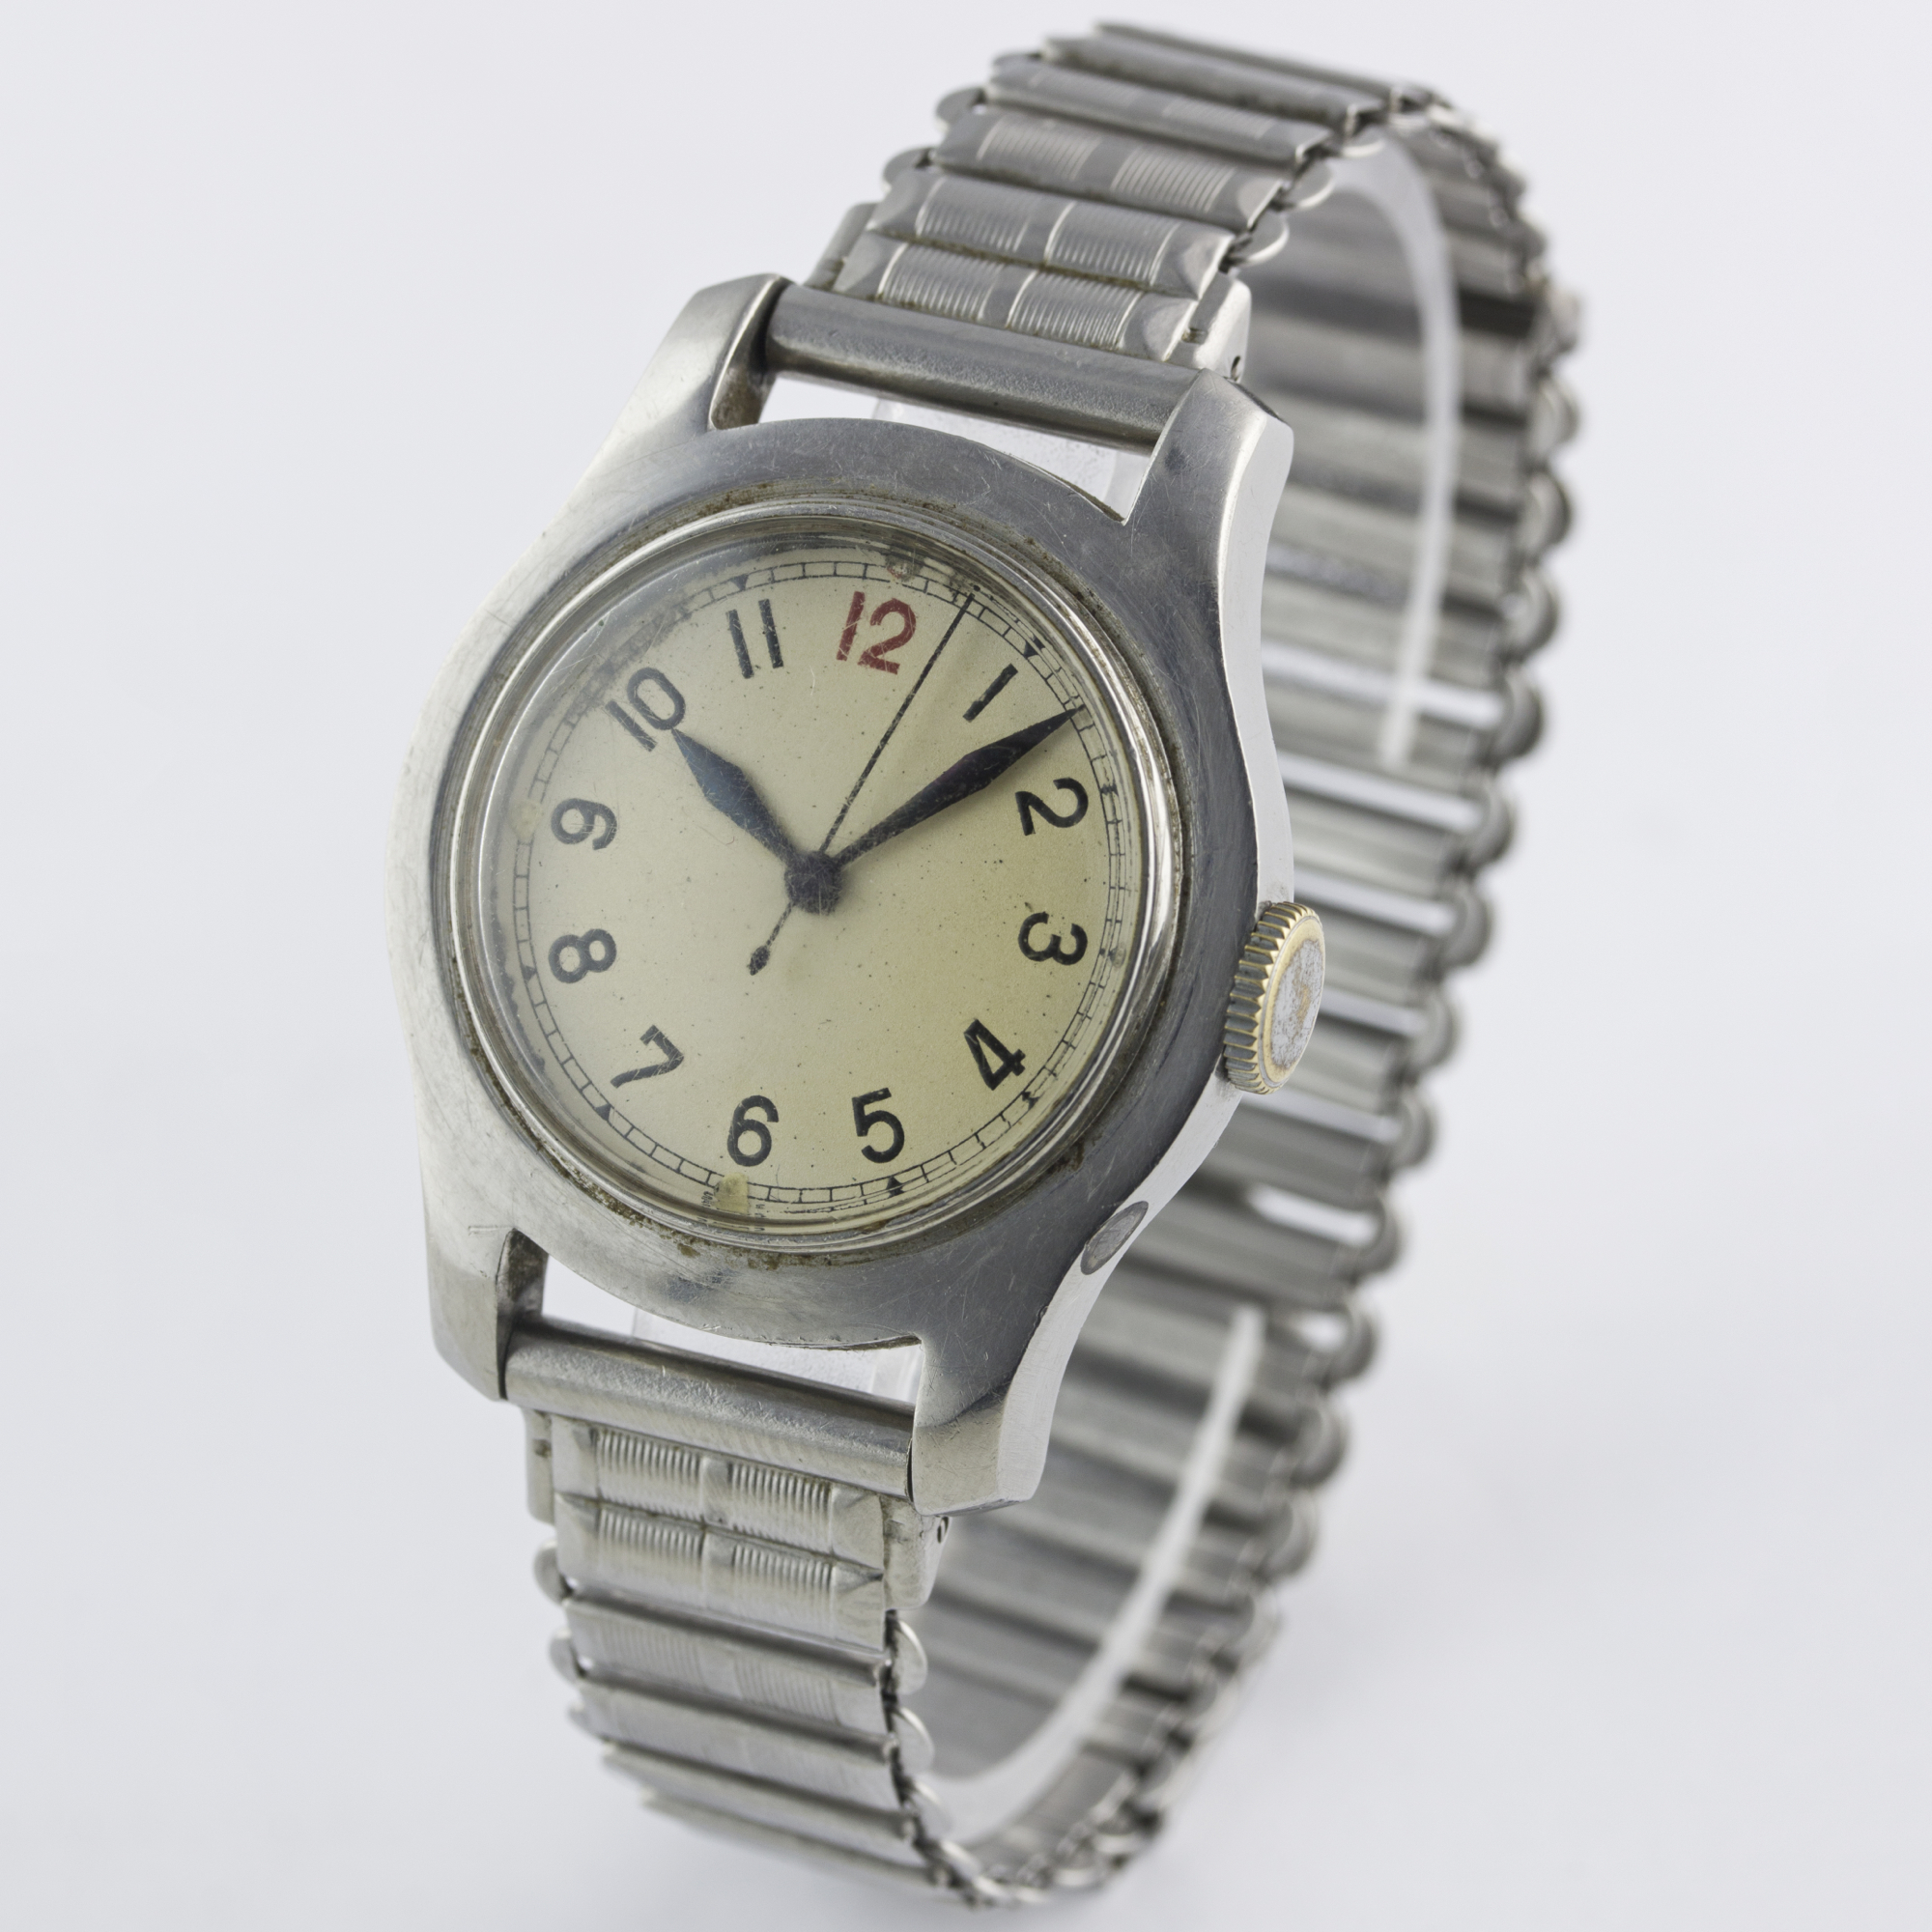 A GENTLEMAN'S STAINLESS STEEL BRITISH MILITARY RAF JAEGER LECOULTRE WEEMS AVIATORS BRACELET WATCH - Image 4 of 8